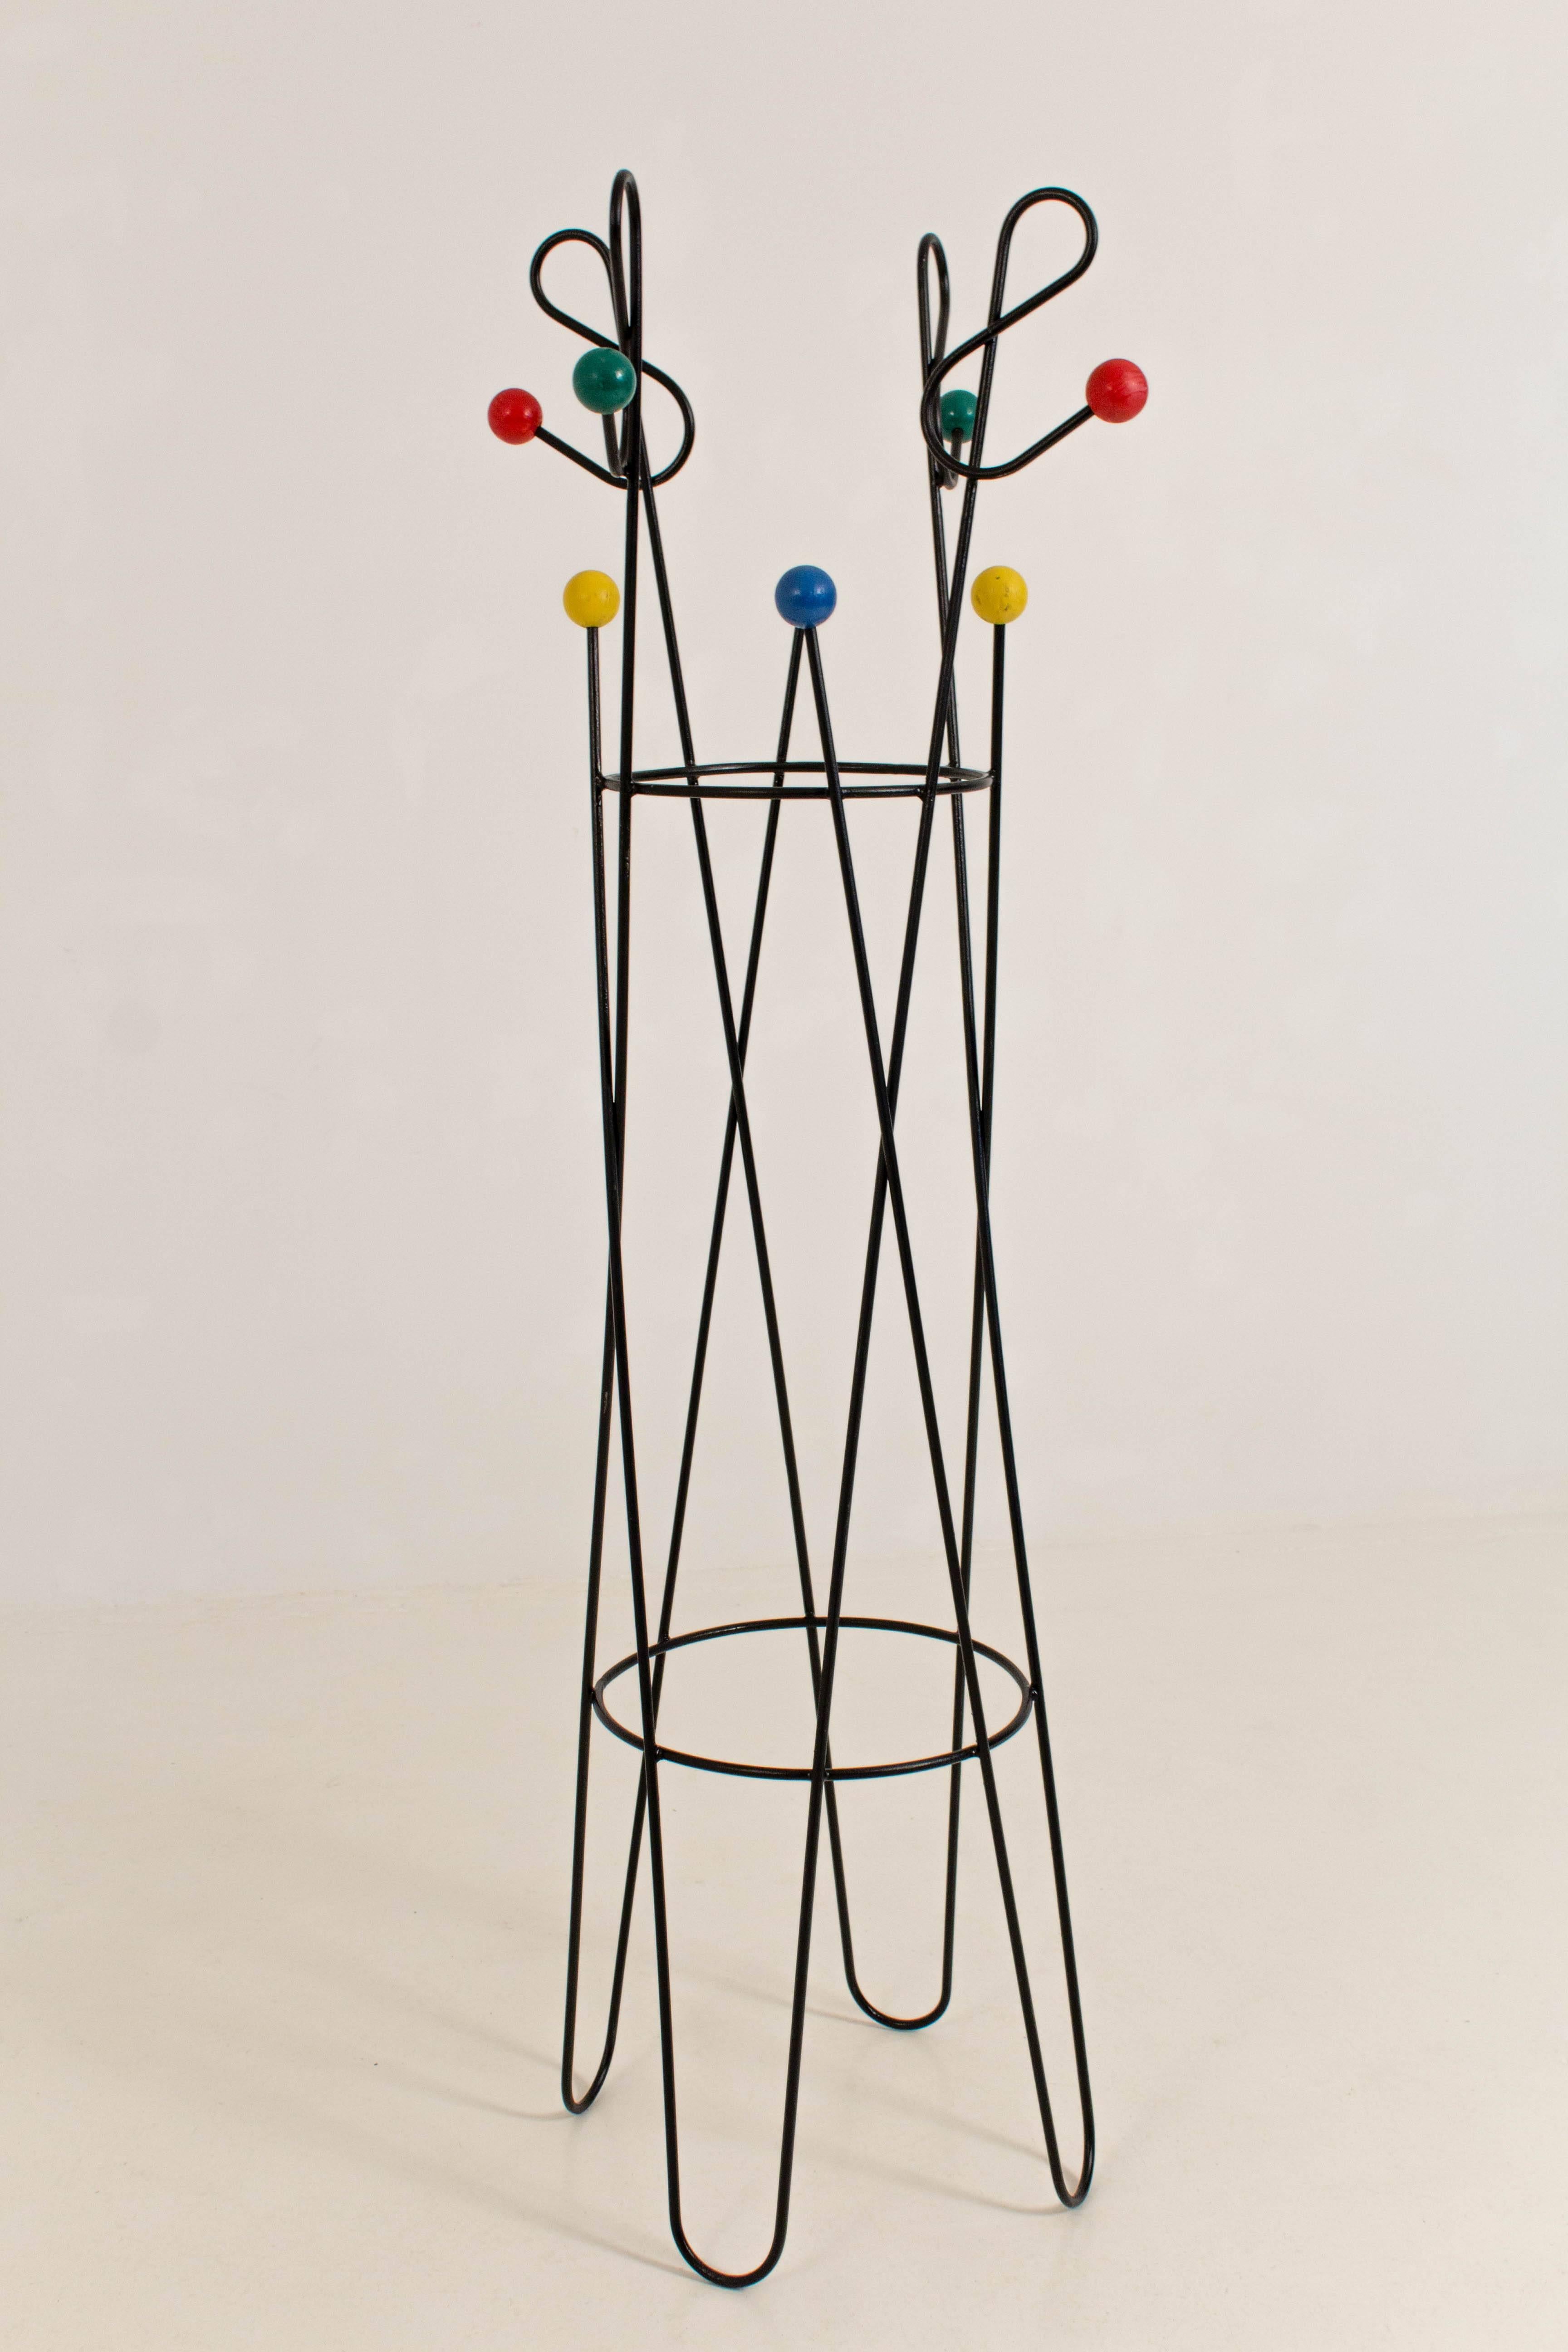 Mid-Century Modern French iron coat stand by Roger Feraud.
Lacquered iron frame with eight lacquered wooden spheres.
In very good condition.